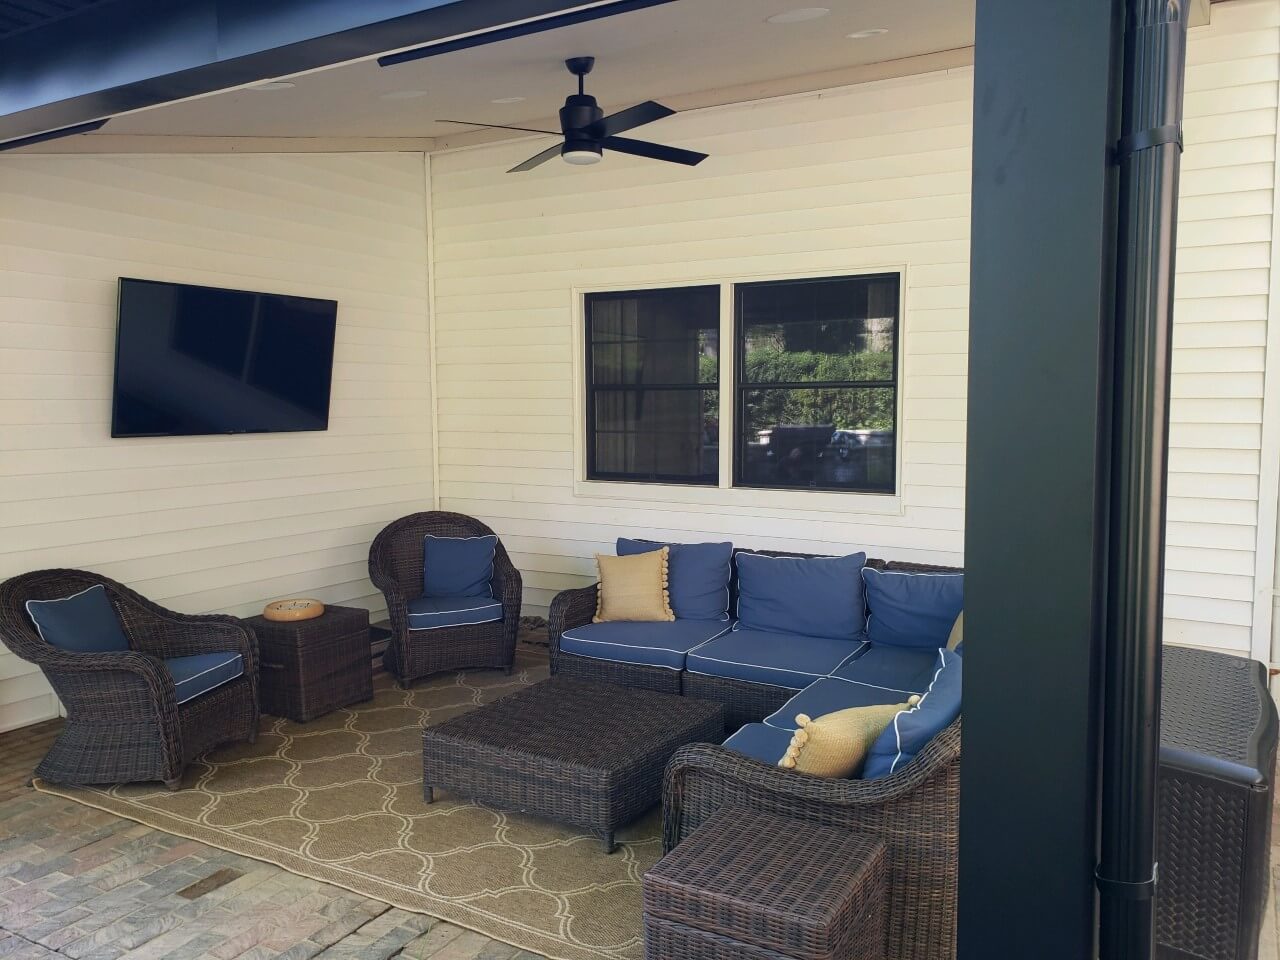 Seating area on covered porch